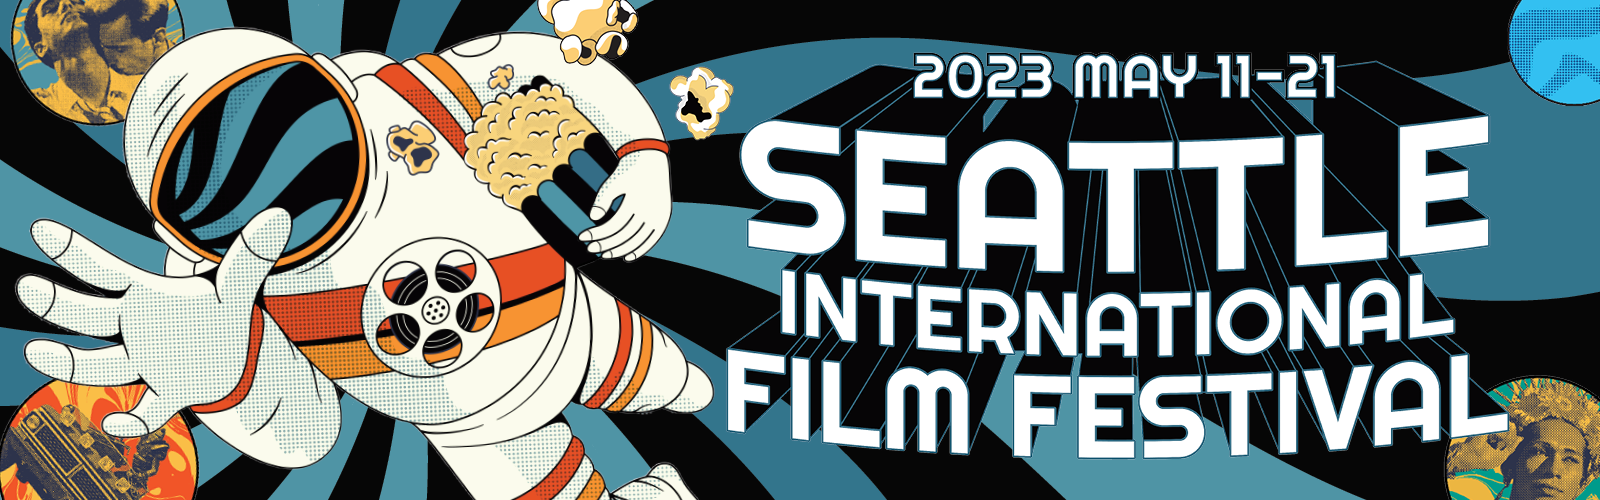 49th Seattle International Film Festival takes place May 11-21, 2023